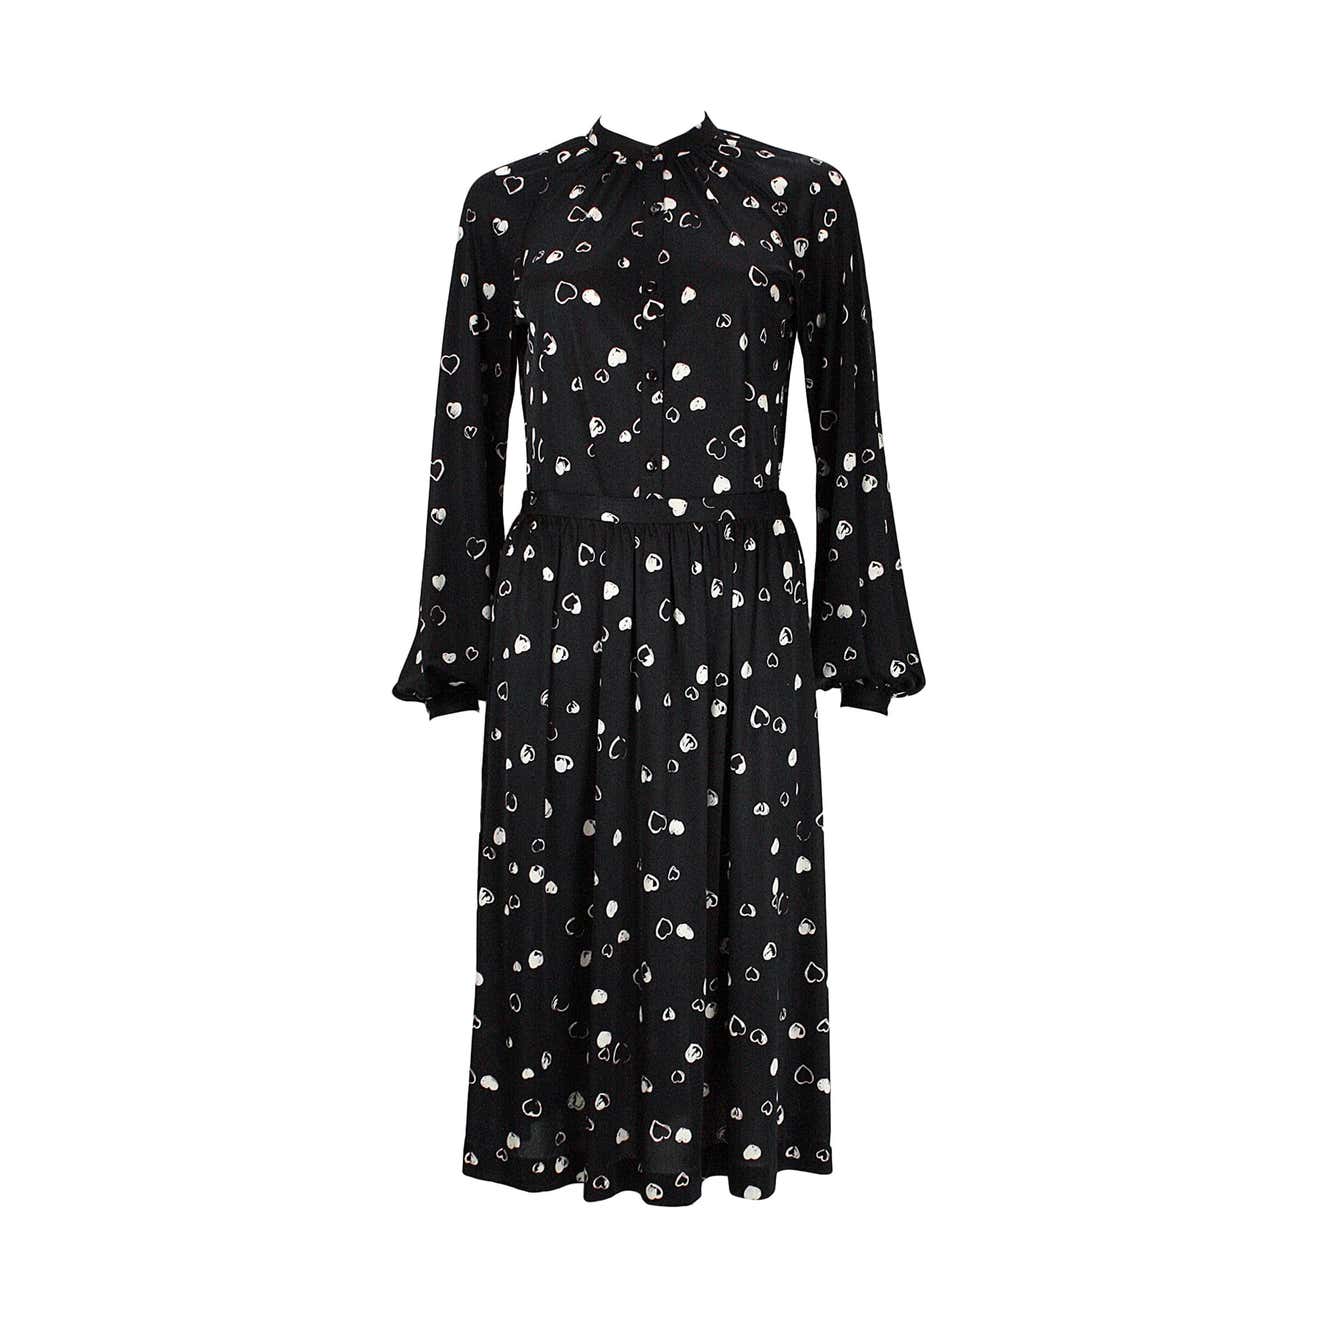 1970s Halston Black and White Heart Print Button-Down Shirt and Skirt ...